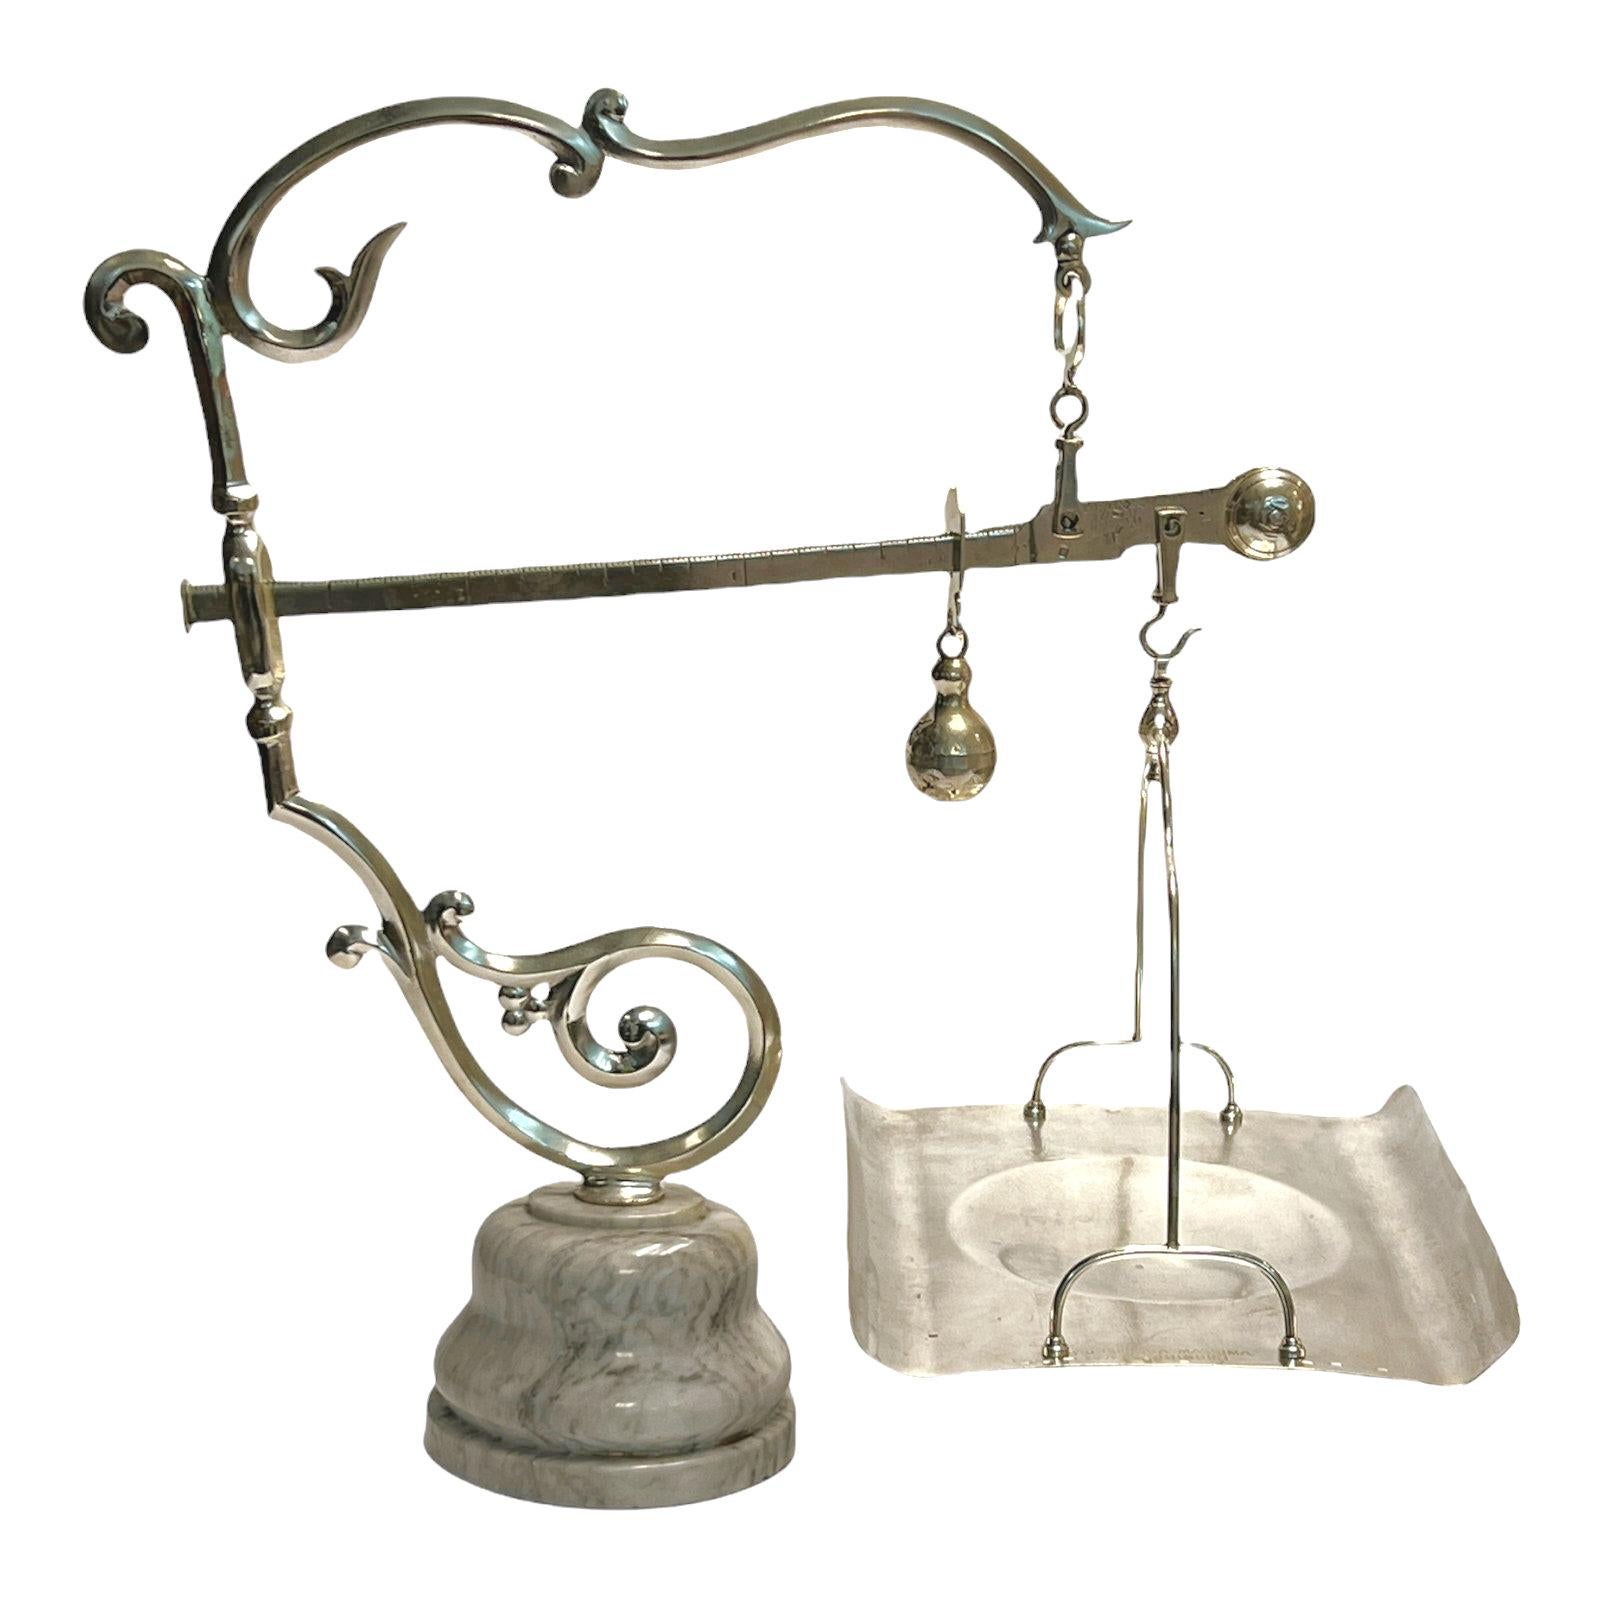 Our elegant antique Italian mercantile scale, circa 1880s, is crafted from chromium plated brass and steel with an oval shaped, variegated blue and white marble base. With various stamped calibration marks. Tray is stamped 15KG PORTATA MASSIMA